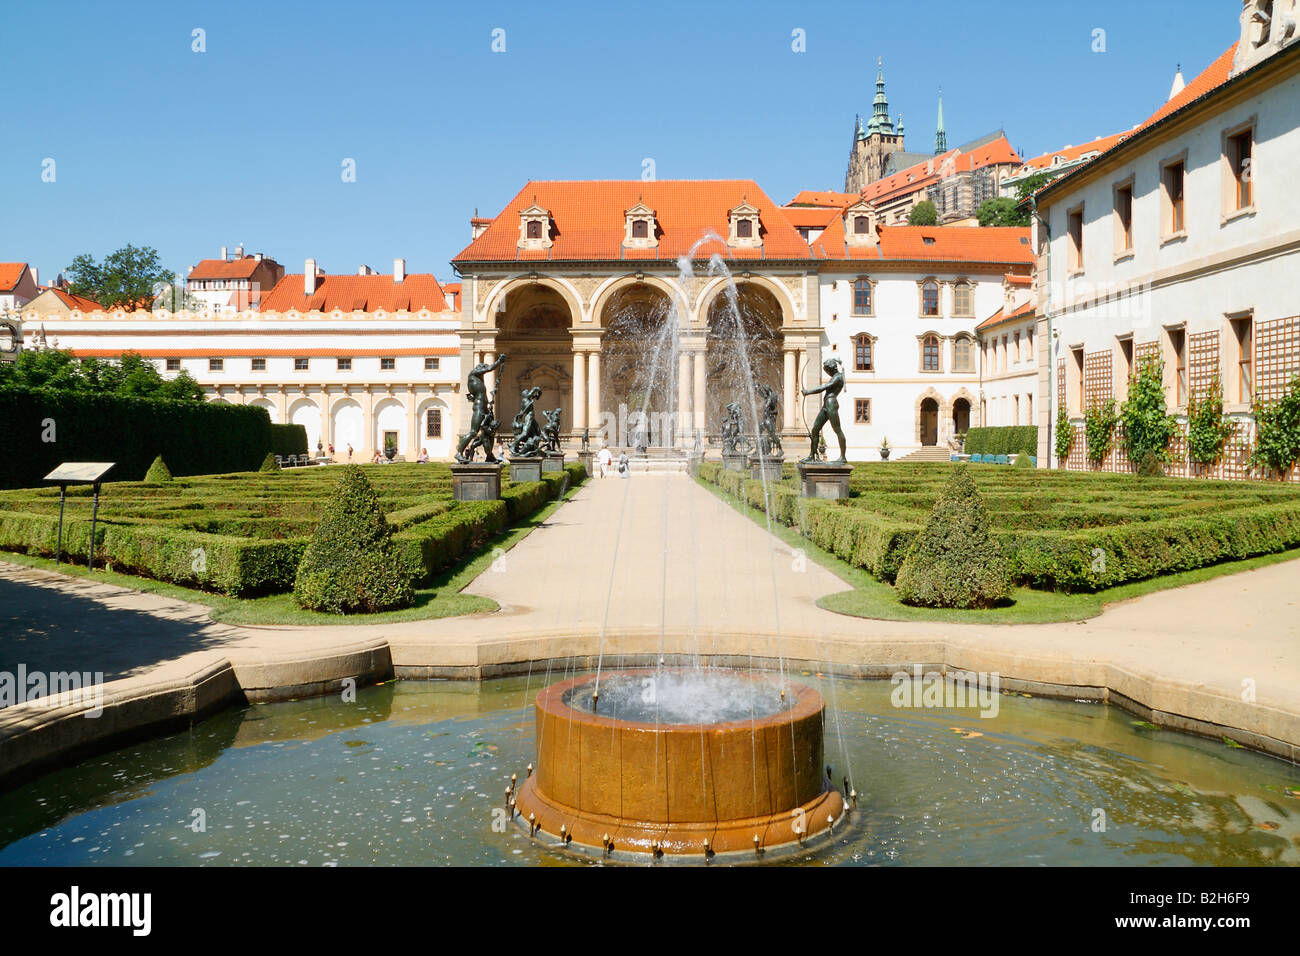 The view of the Prague s Palace Gardens with the small fontain and the alley with bronze statues of the mythological gods Stock Photo